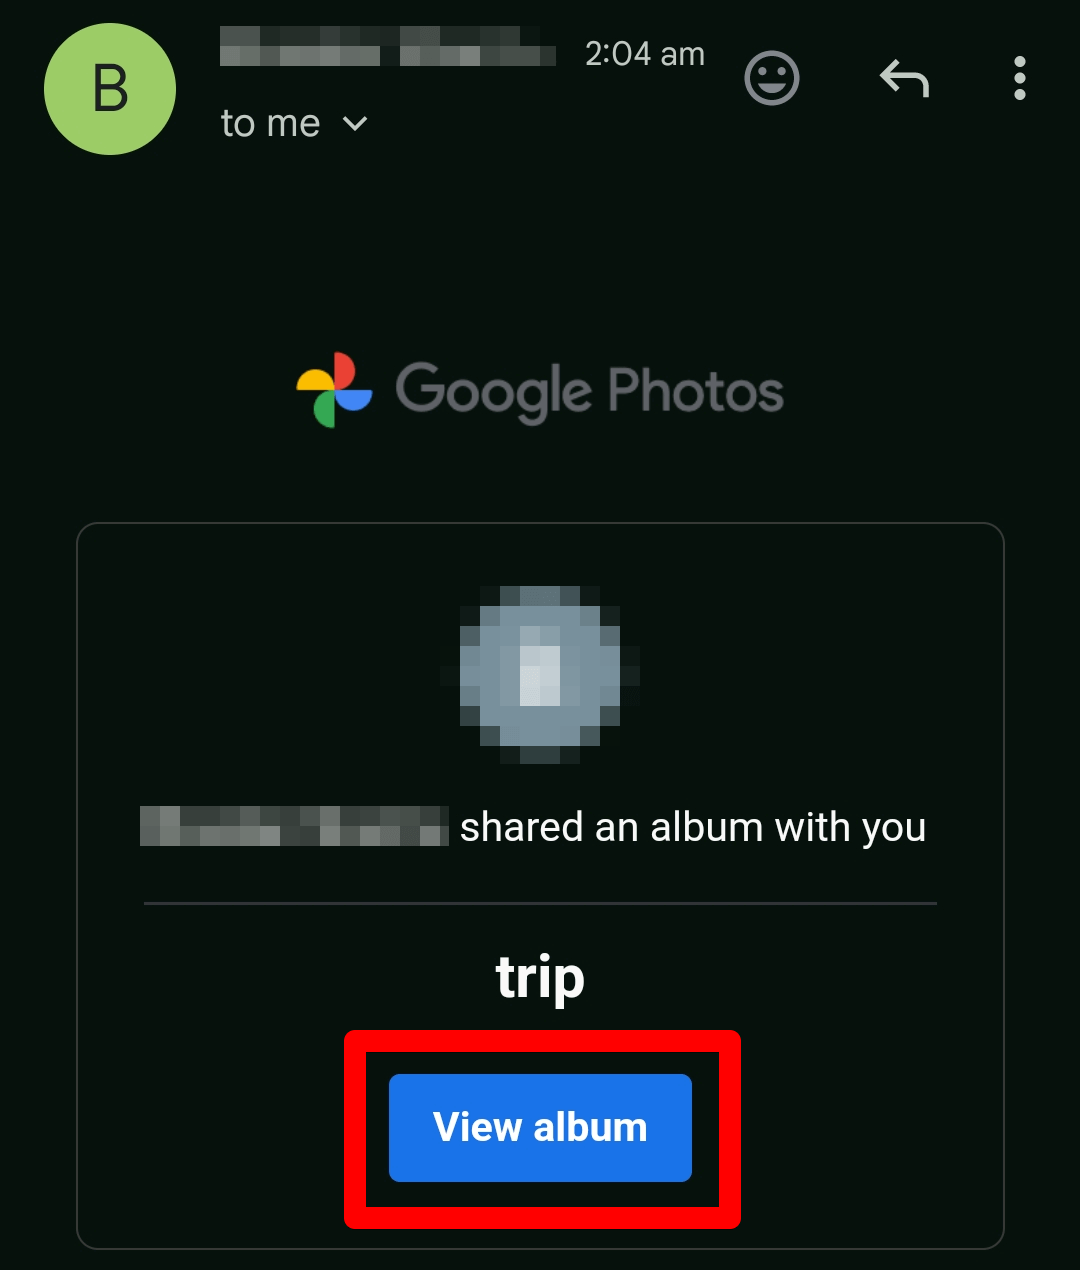 "View Album" highlighted in Gmail on a mobile phone.